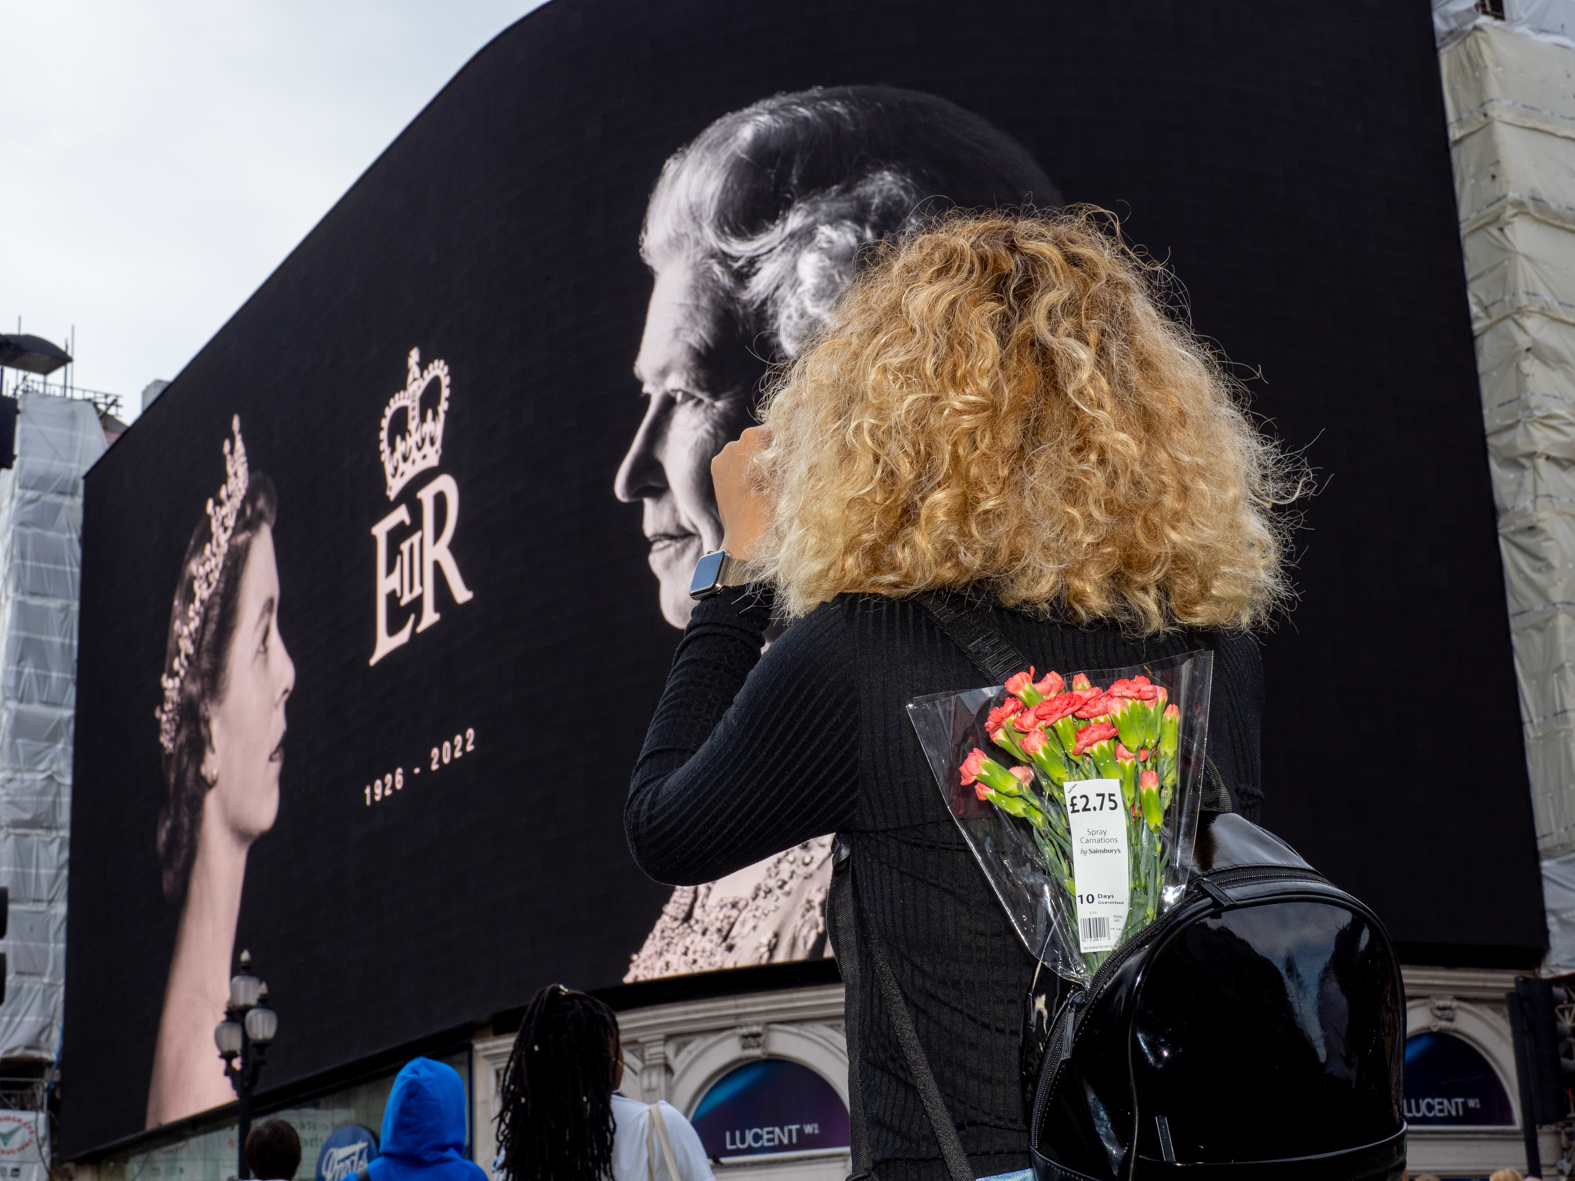 Remembering the Queen Elizabeth II in central London on the 9th September in London, United Kingdom following her death at the age of 96. (photo by Peter Dench/Getty Images)